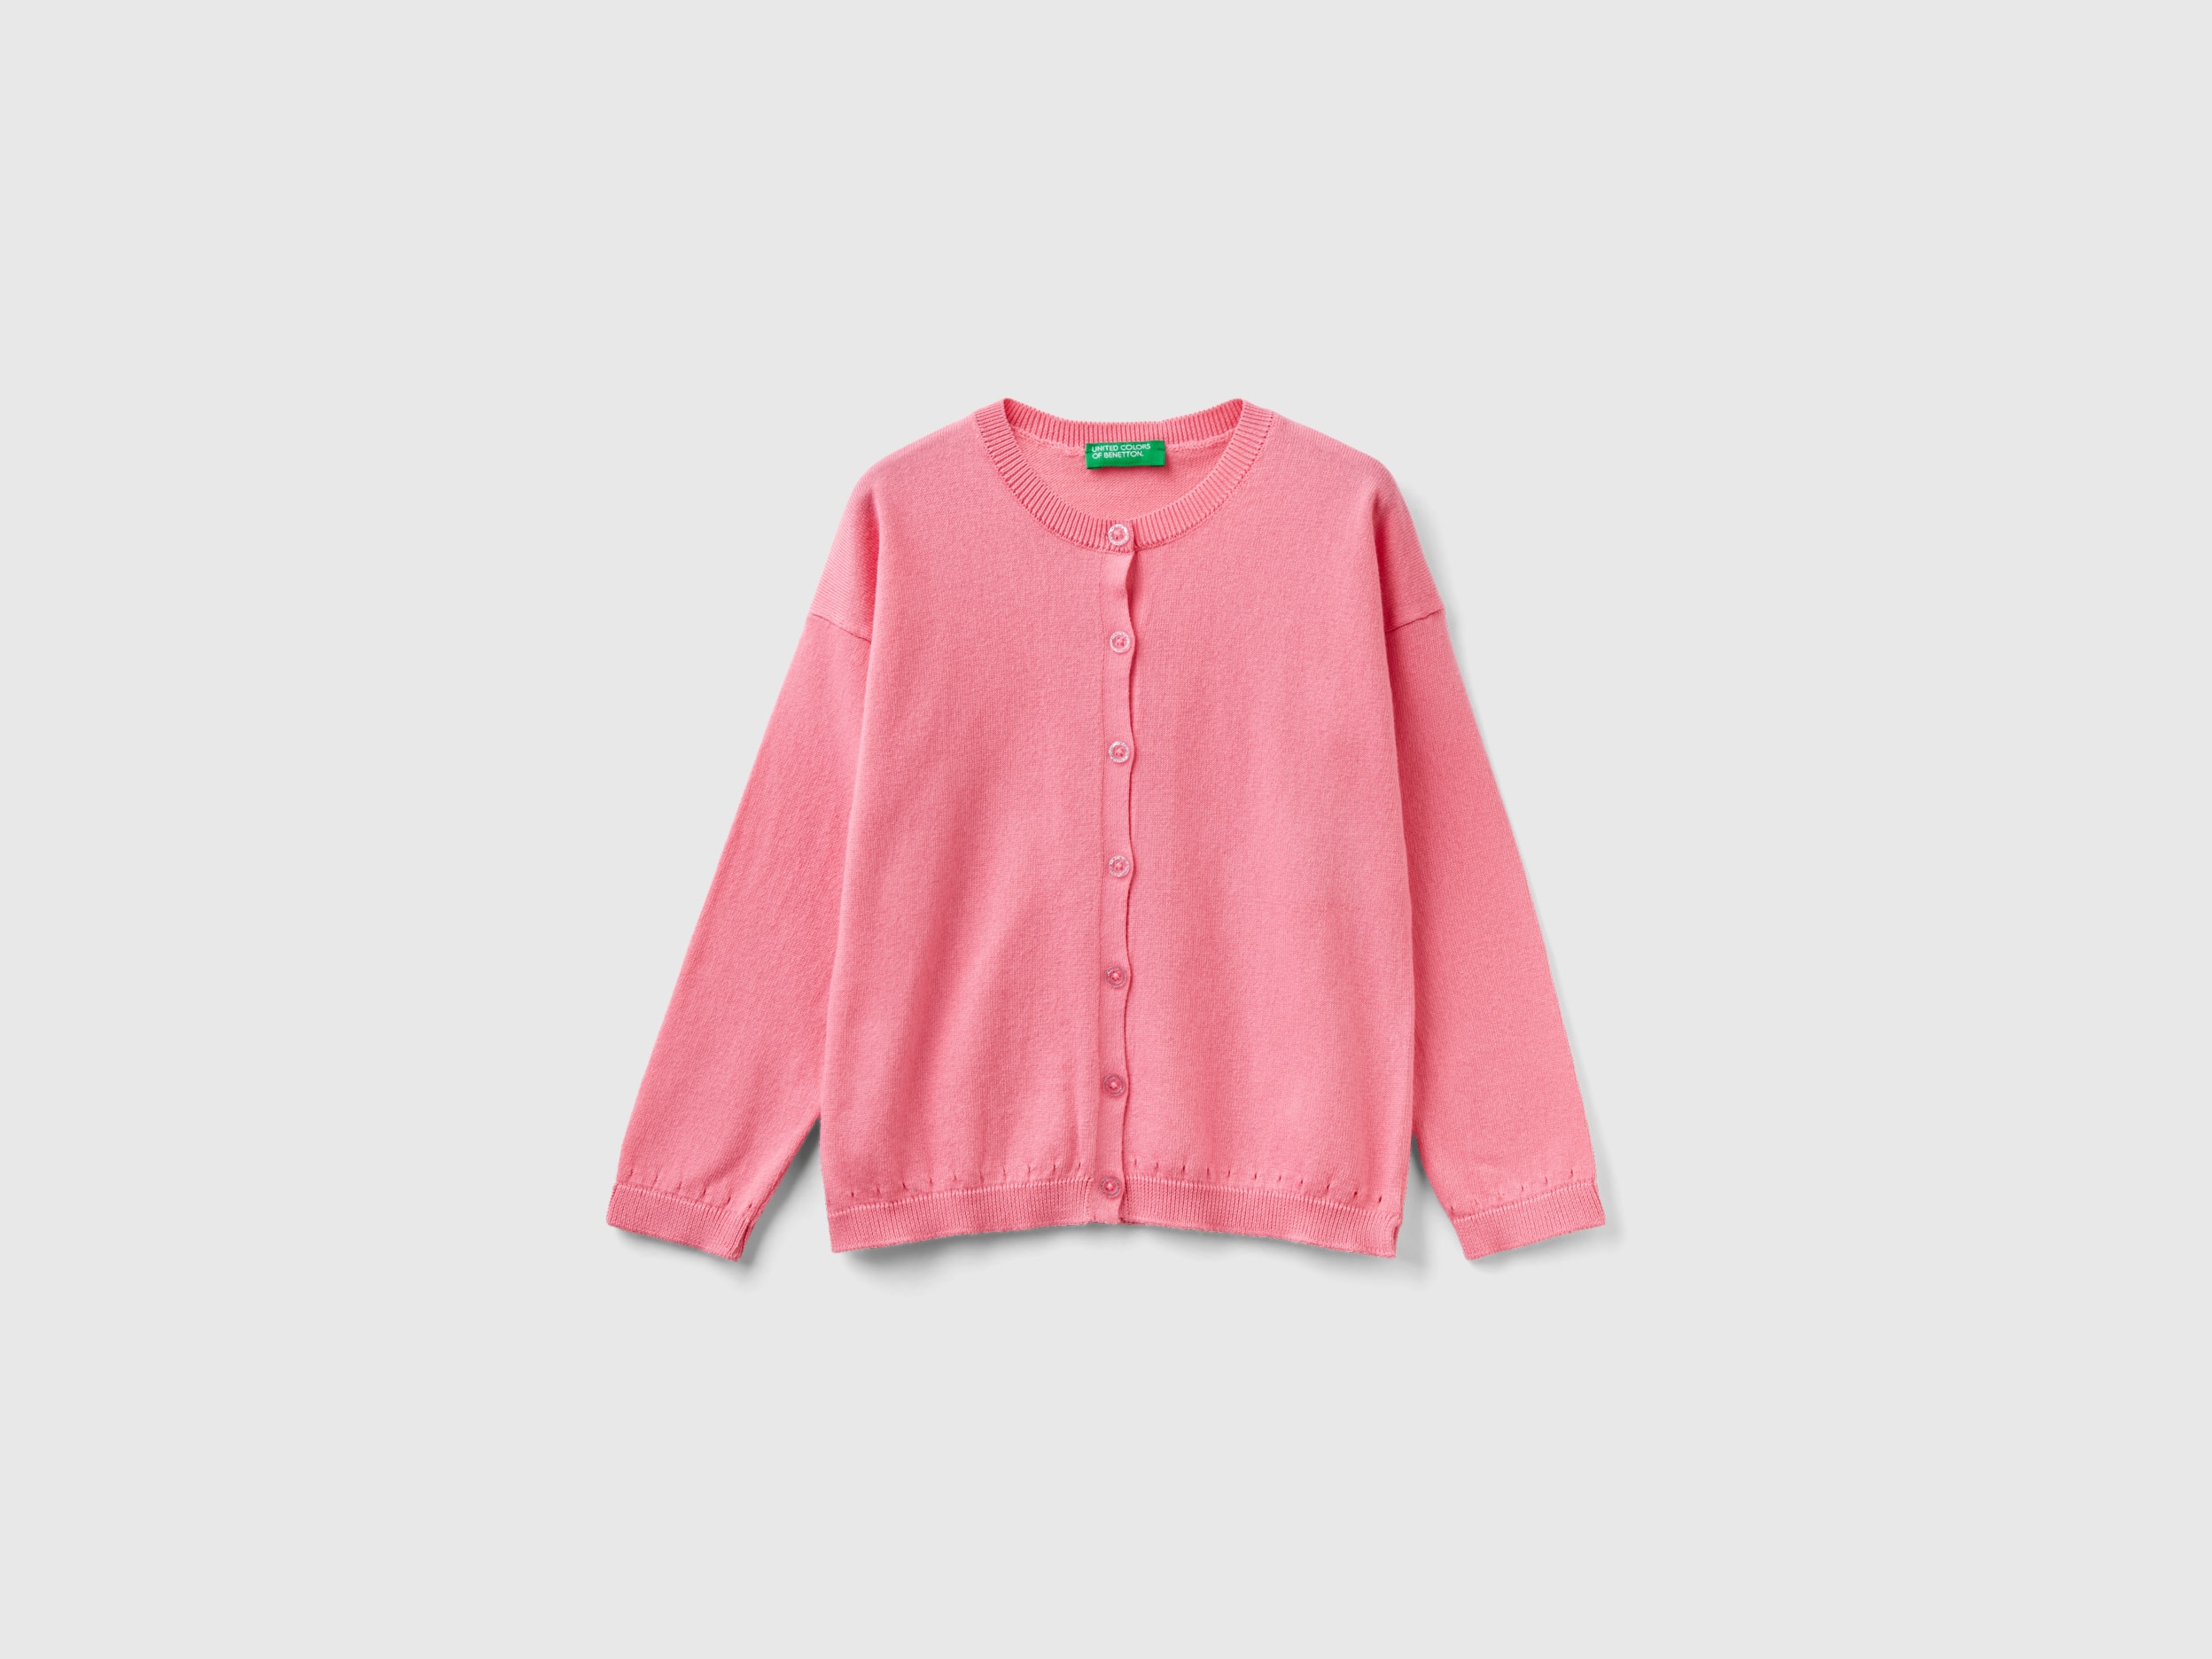 Benetton, Cardigan With Glittery Buttons, size 12-18, Pink, Kids